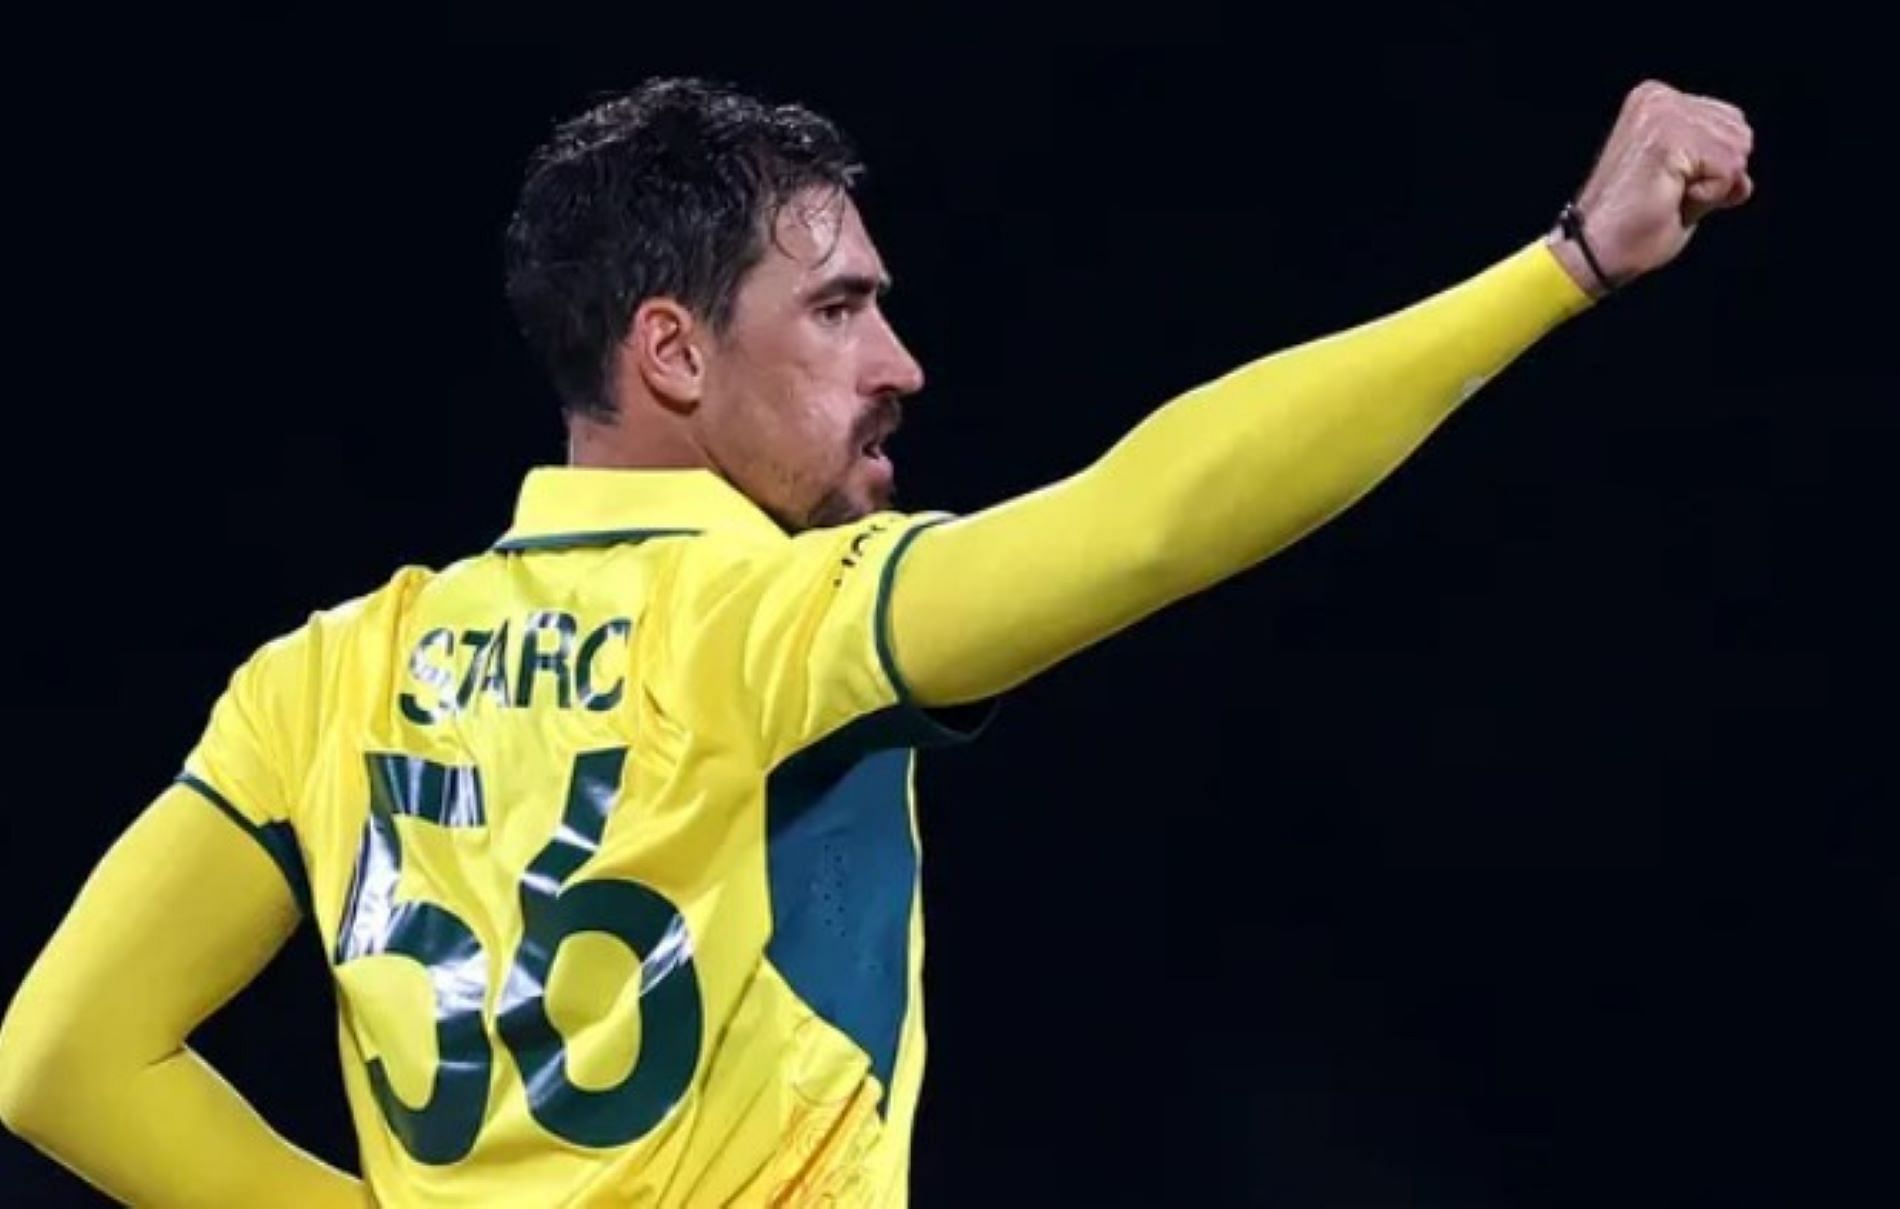 Starc has been wayward with his lines and lengths